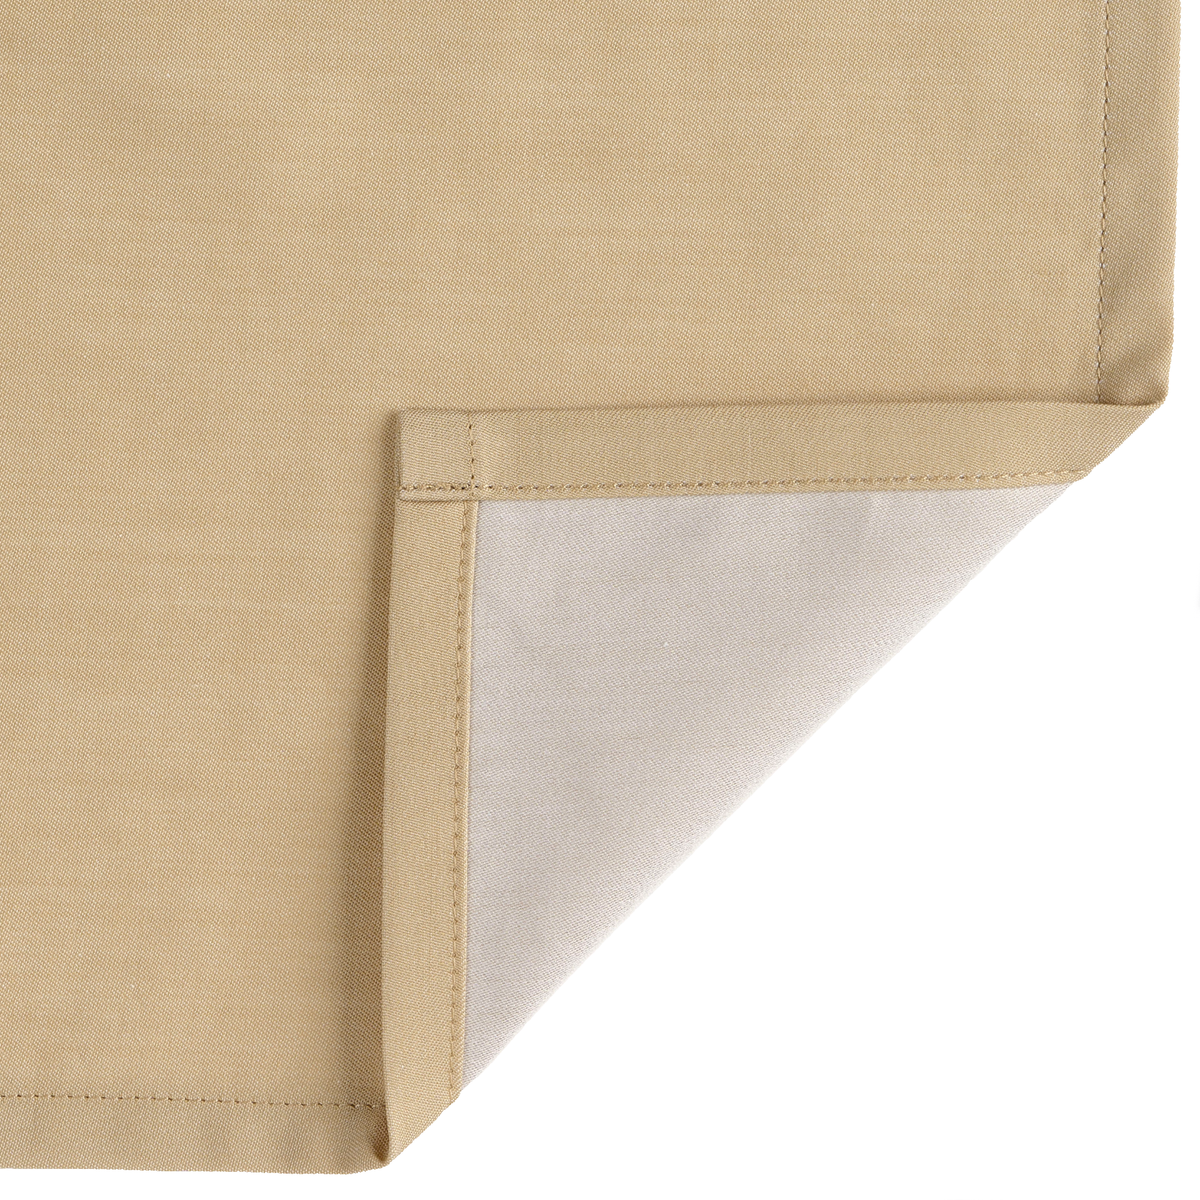 Swatch Sample of Celso de Lemos Calypso Bedding in Champagne Color